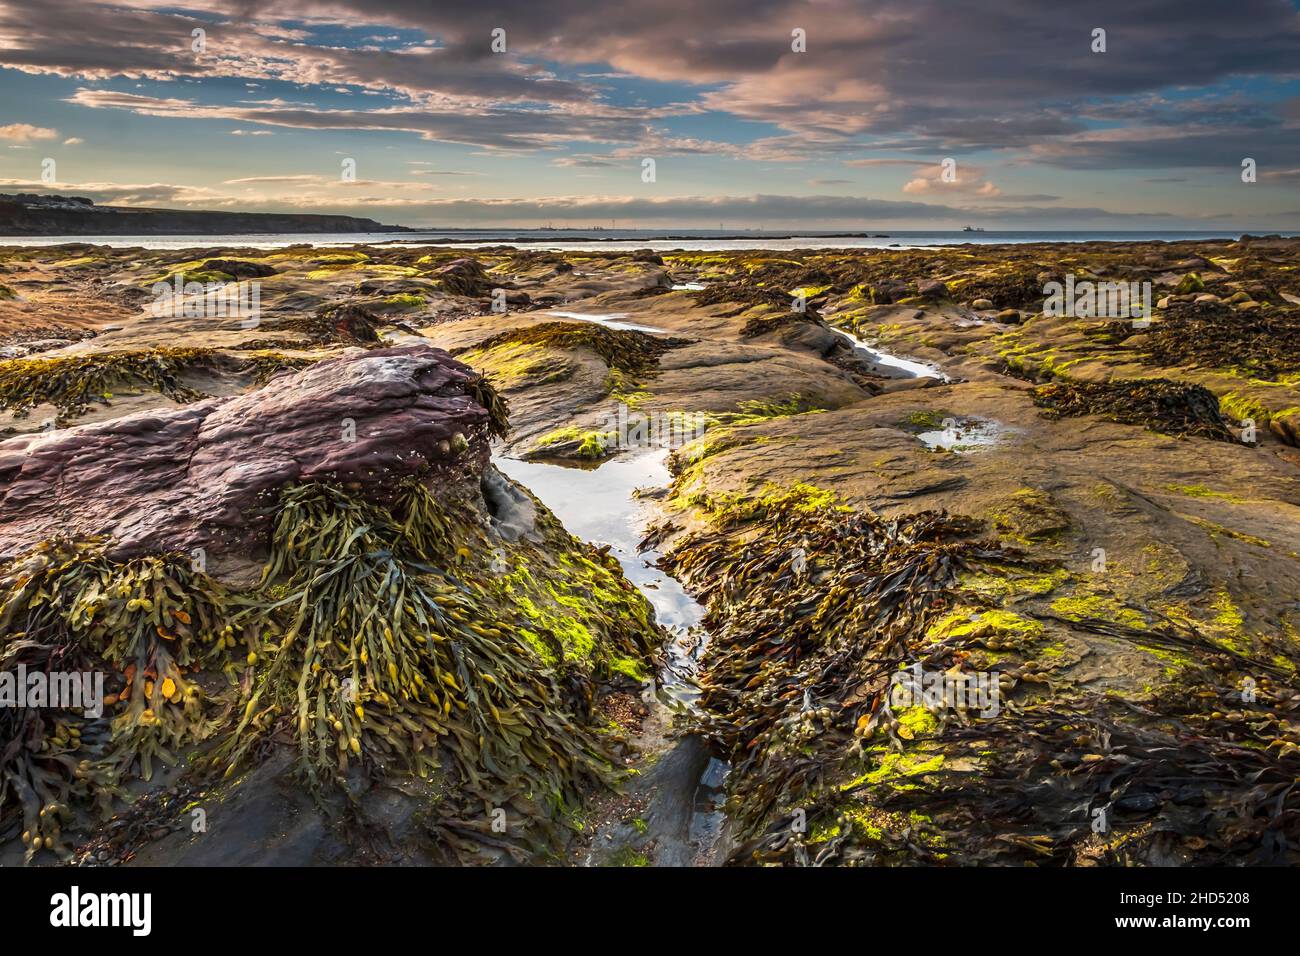 Shapes formed in the rocks at St Marys island near Whitley Bay. Stock Photo